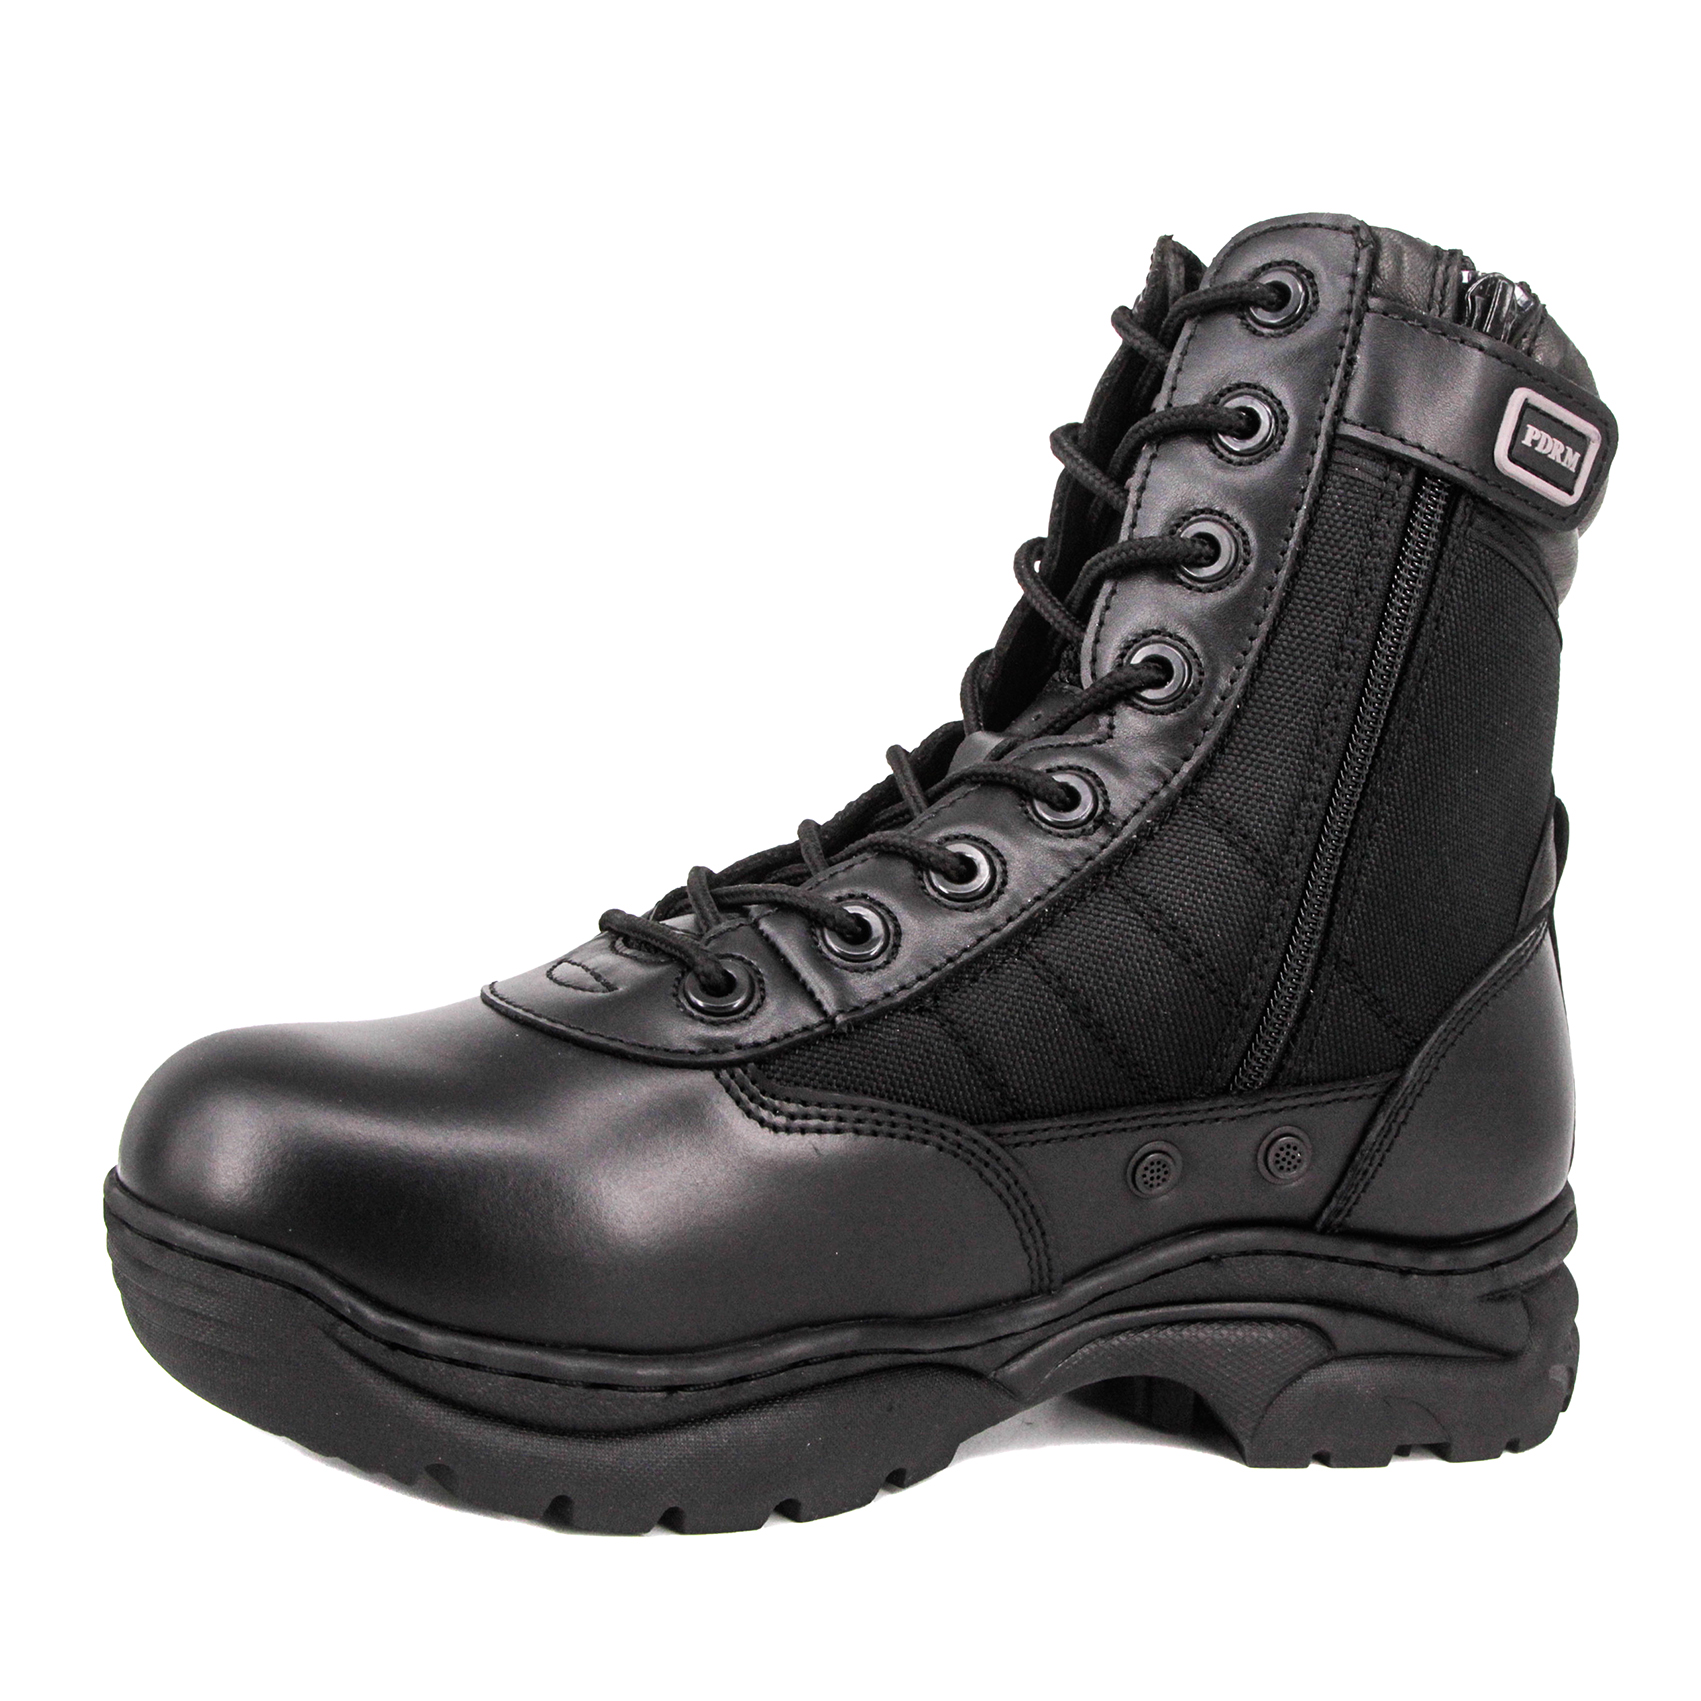 MILFORCE Genuine Leather Tactical Boots army military leather boots 